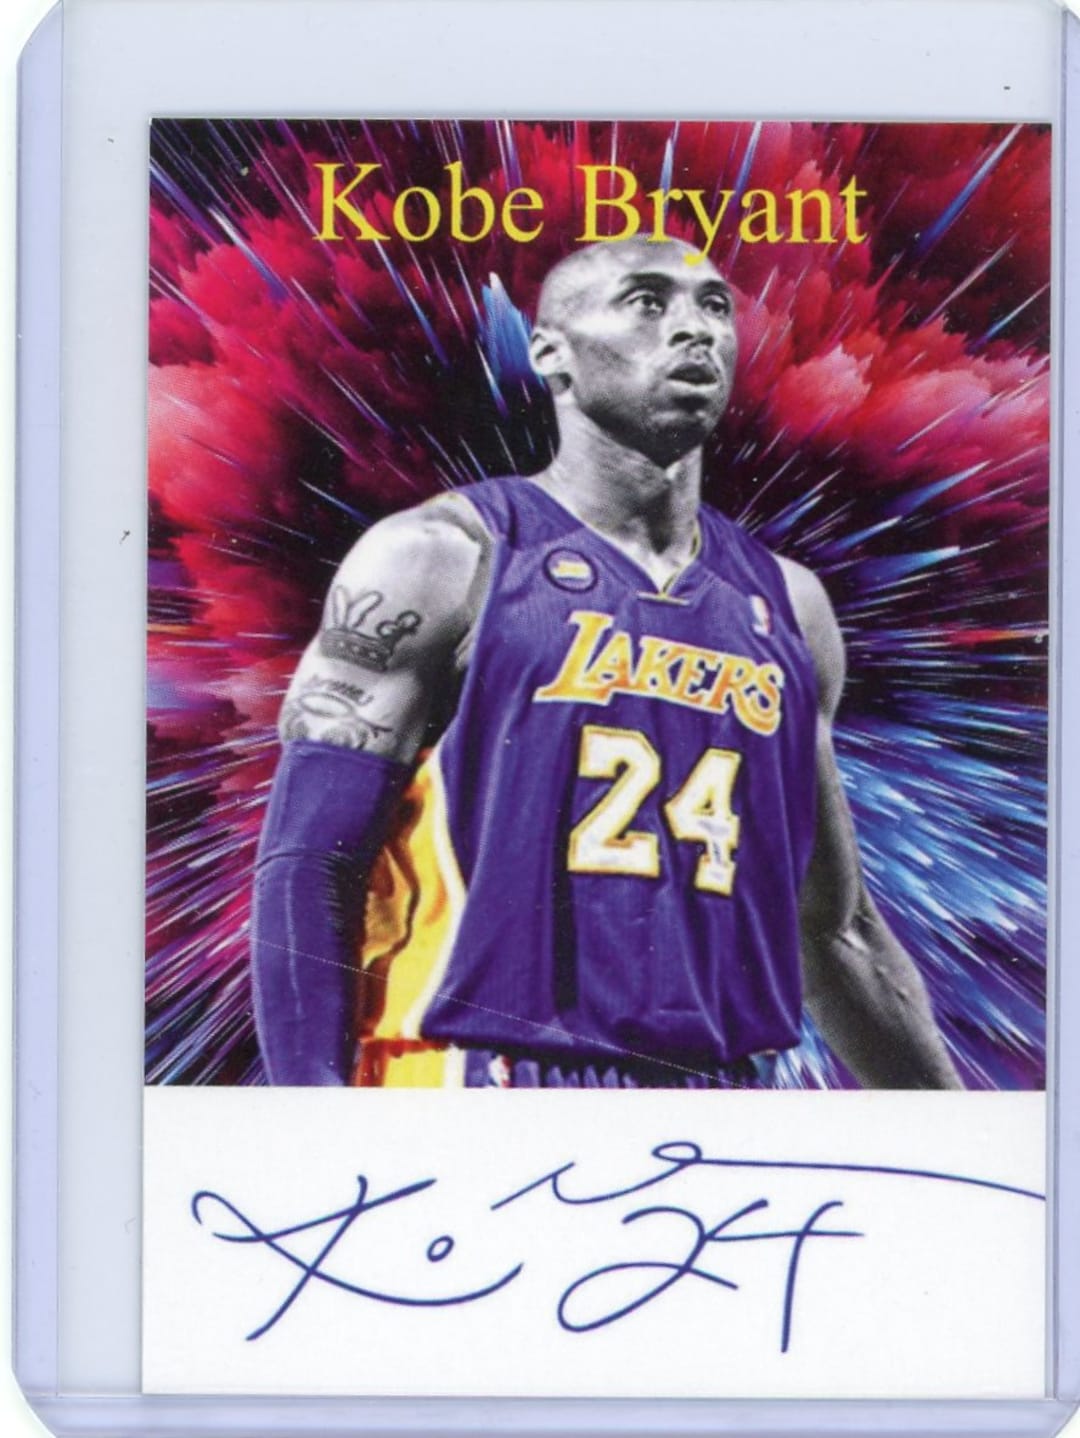 Kobe Bryant Los Angeles Lakers Autographed Framed Basketball Jersey Collage